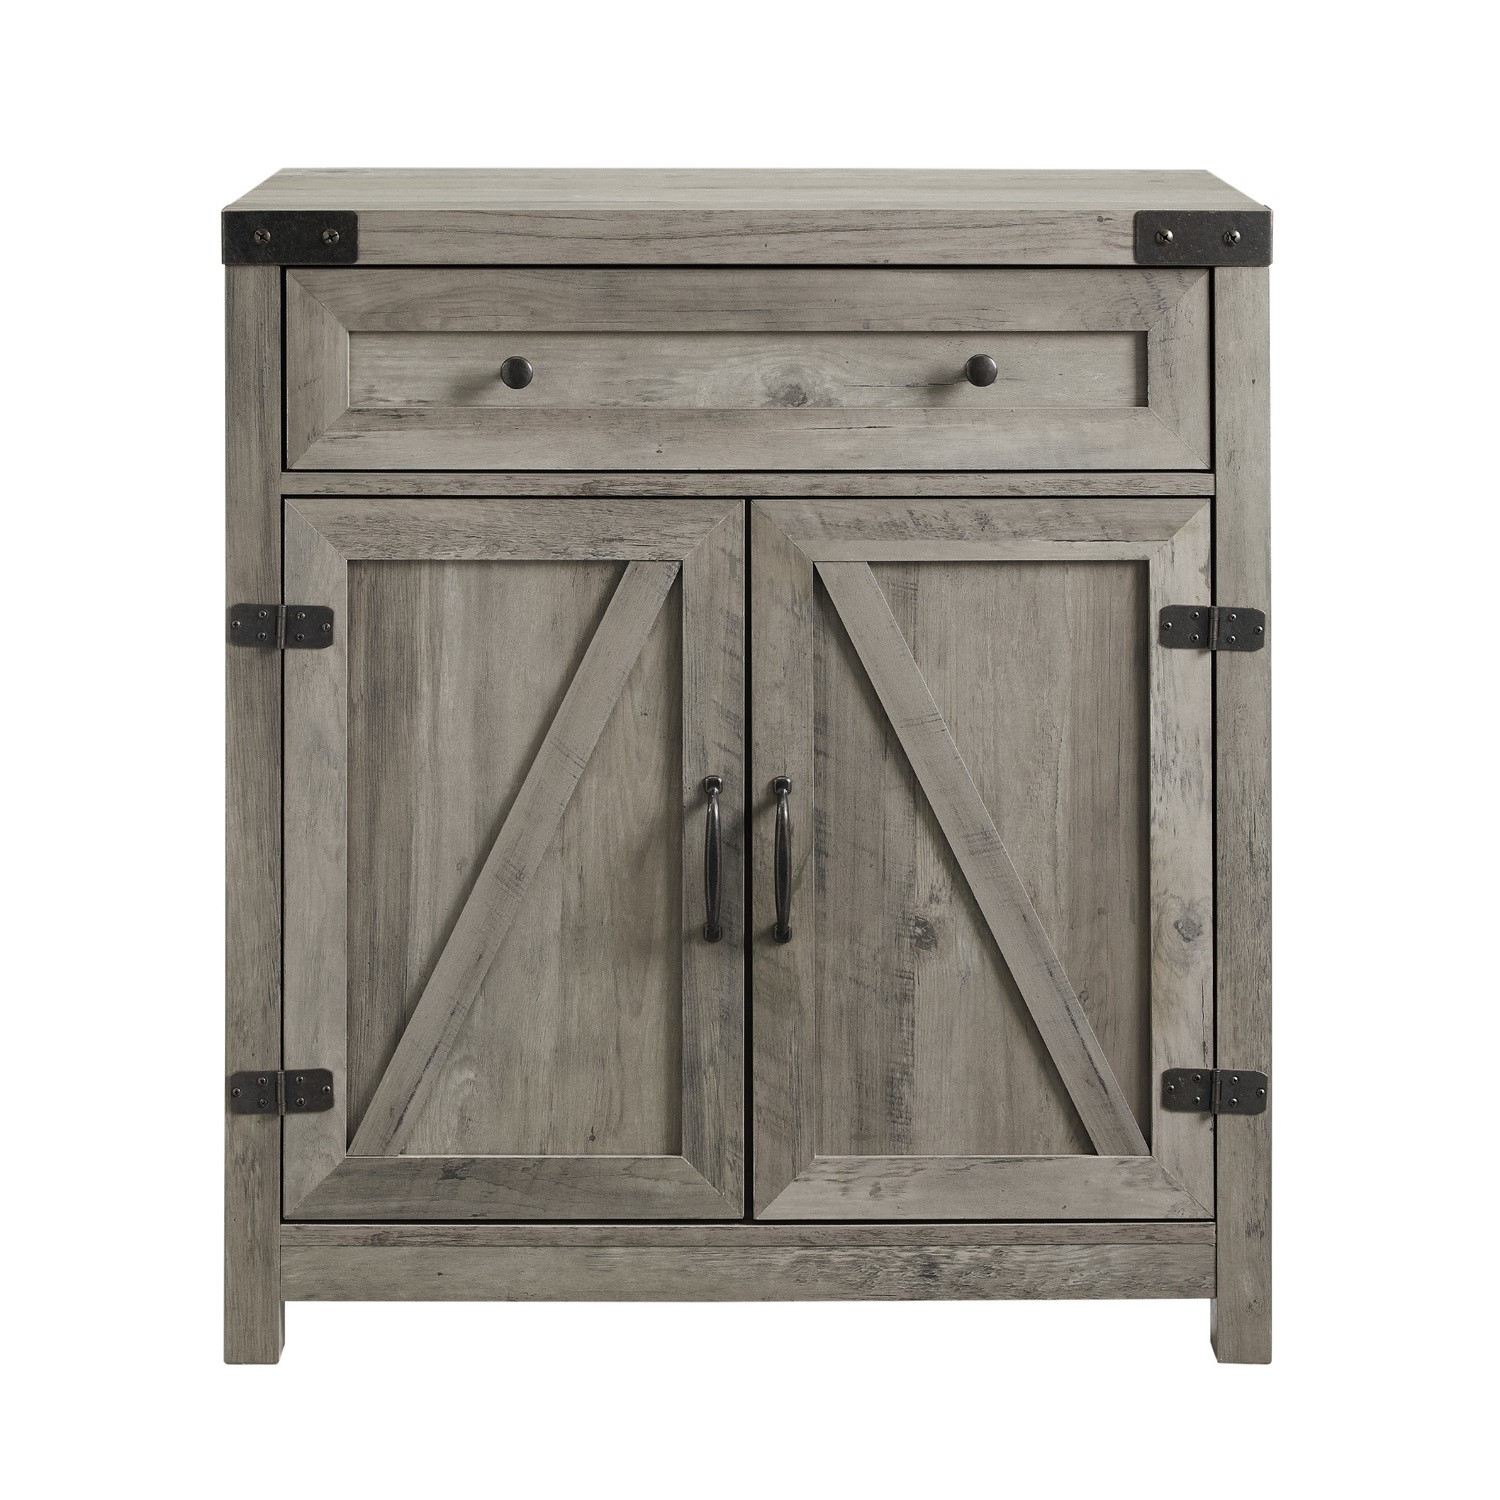 Grey Wooden Sideboard with Double Door & Drawers - Furniture123